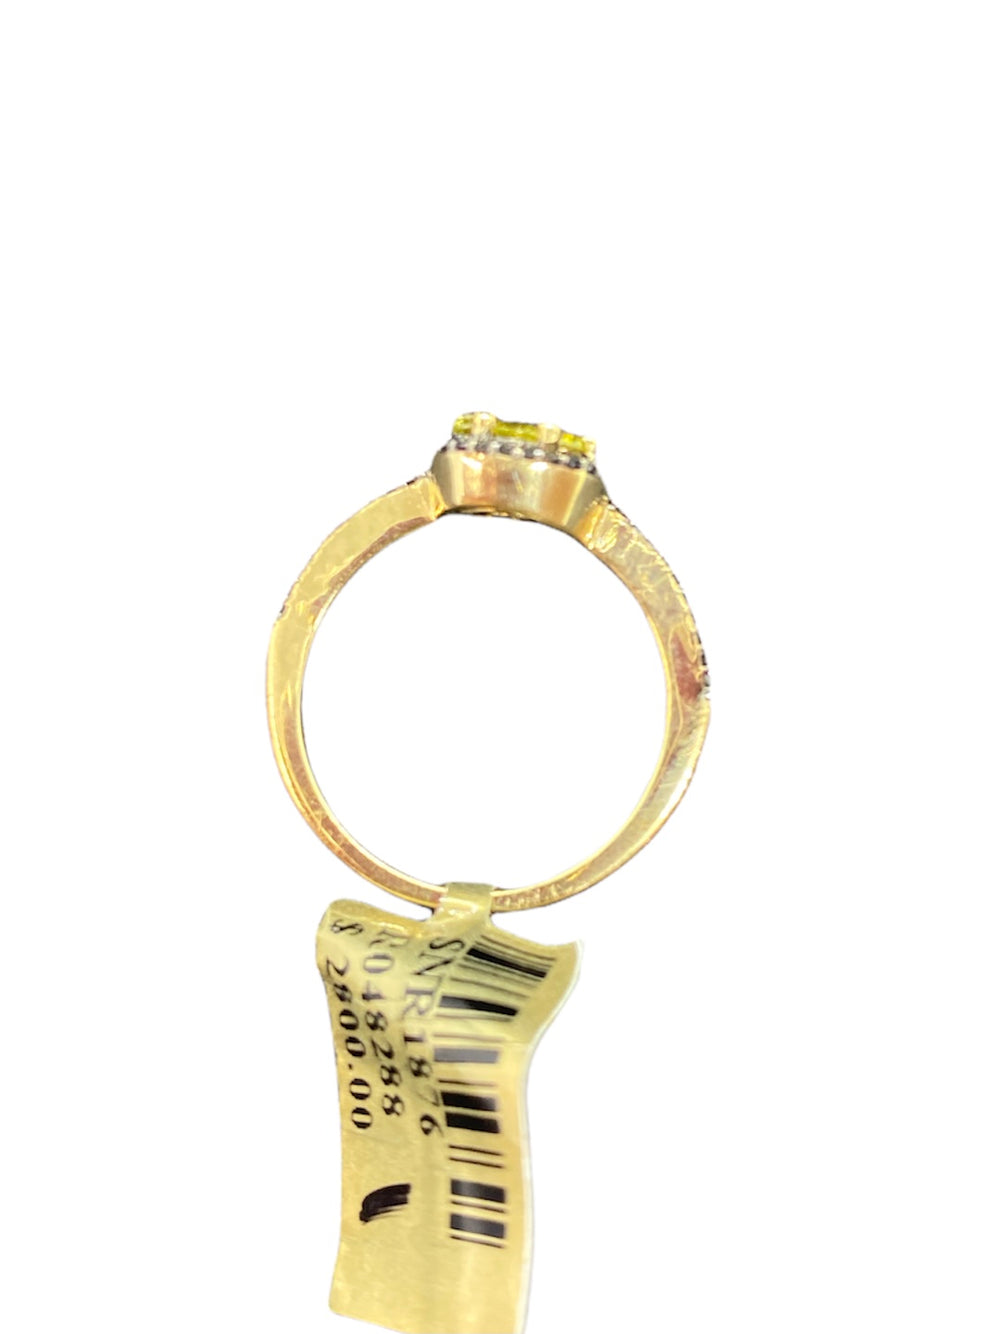 10kt Gold and Diamond women’s ring of 0.59 CTW available on special sale